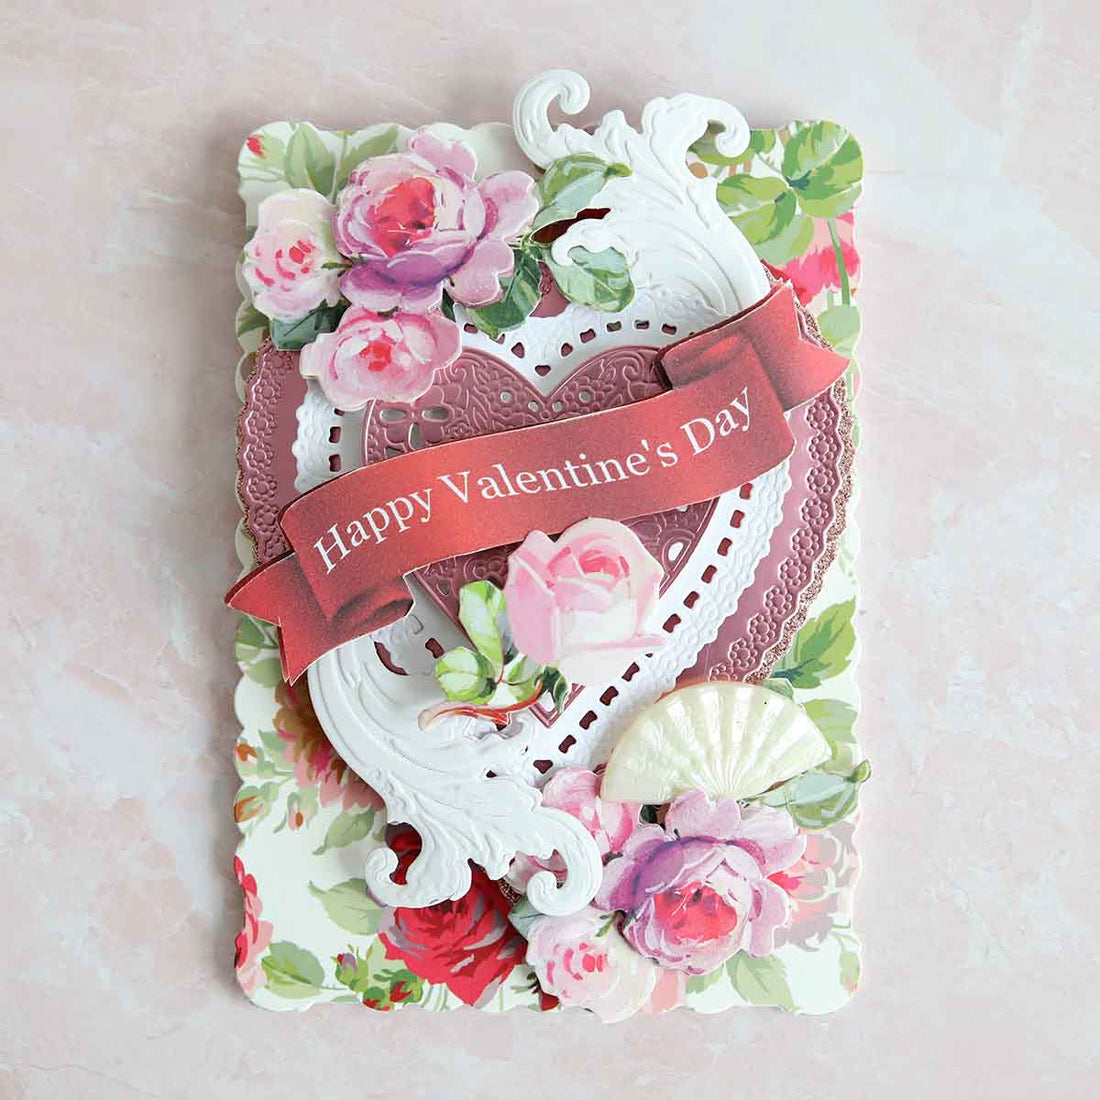 a valentine's day card with roses and seashells.